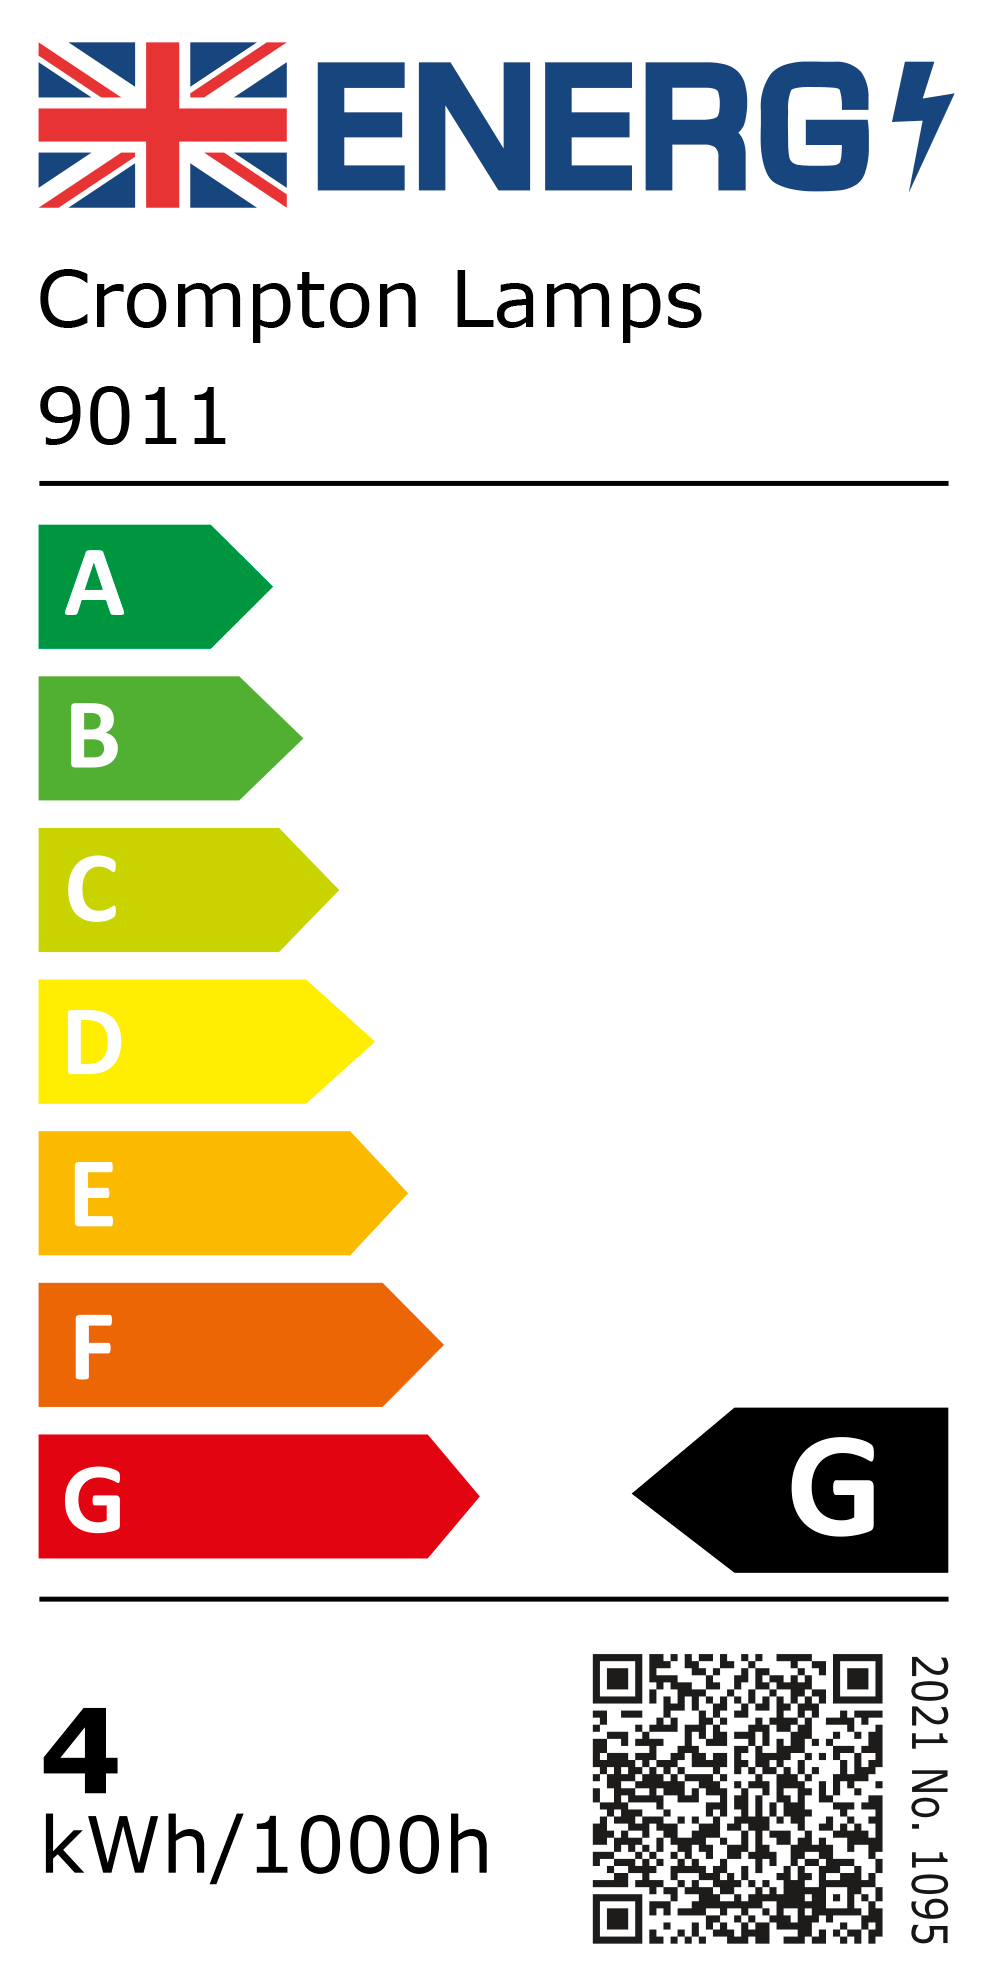 New 2021 Energy Rating Label: Stock Code 9011